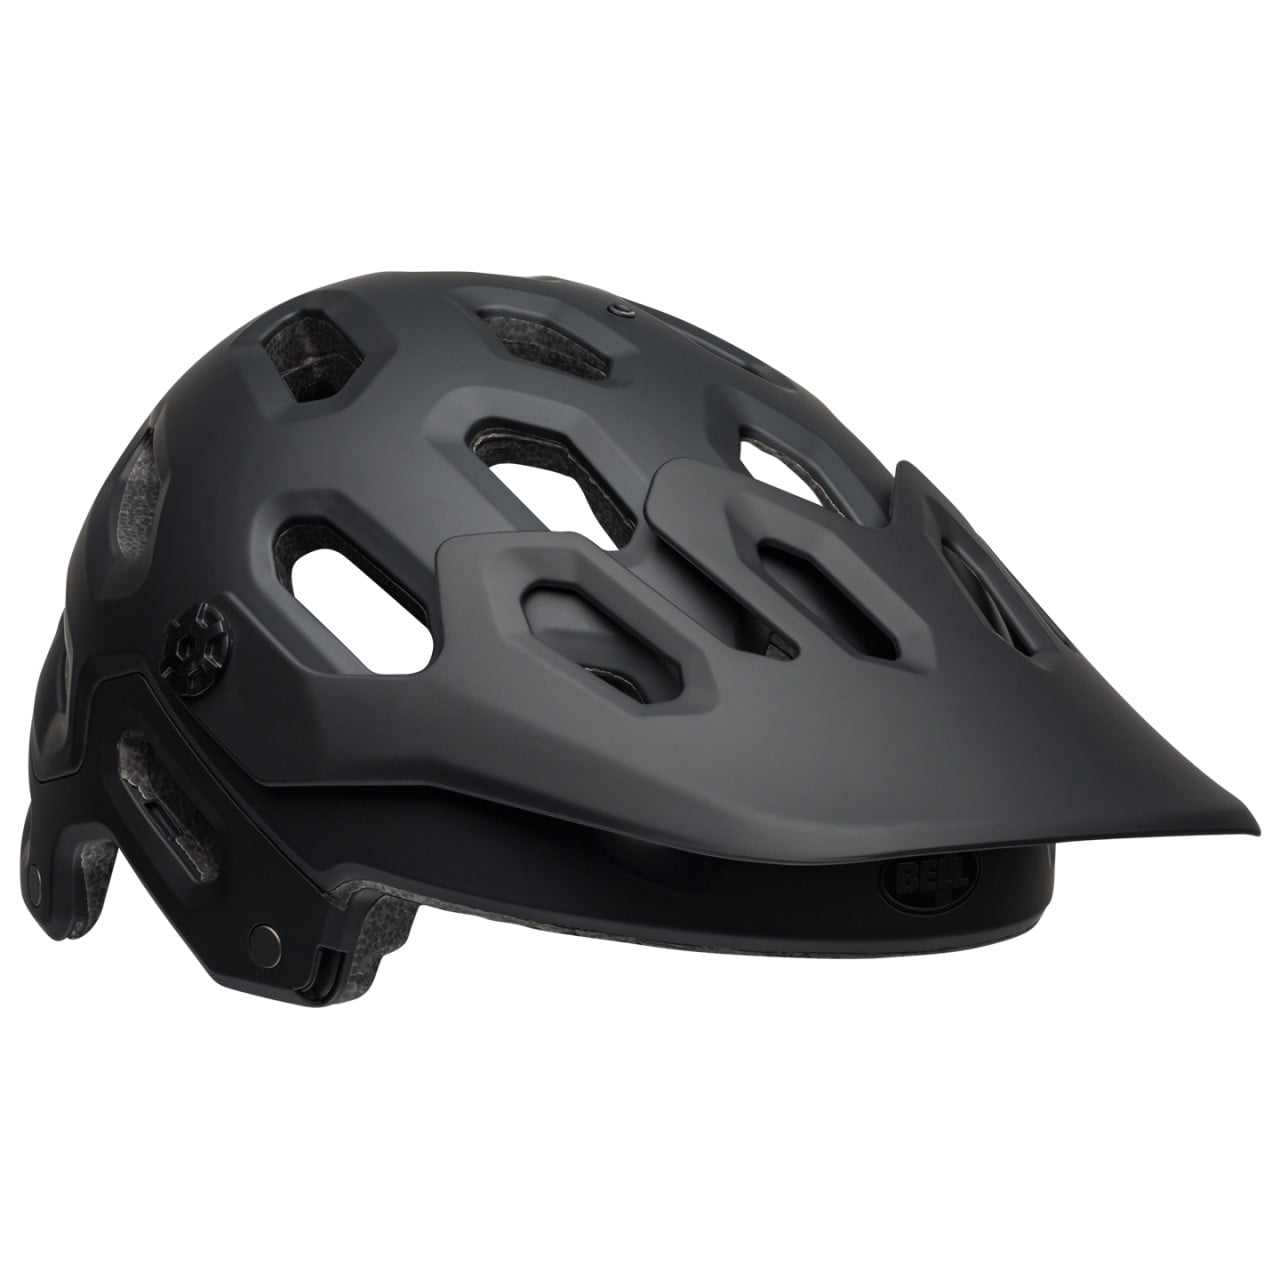 Kask rowerowy Full Face Super 3R Mips